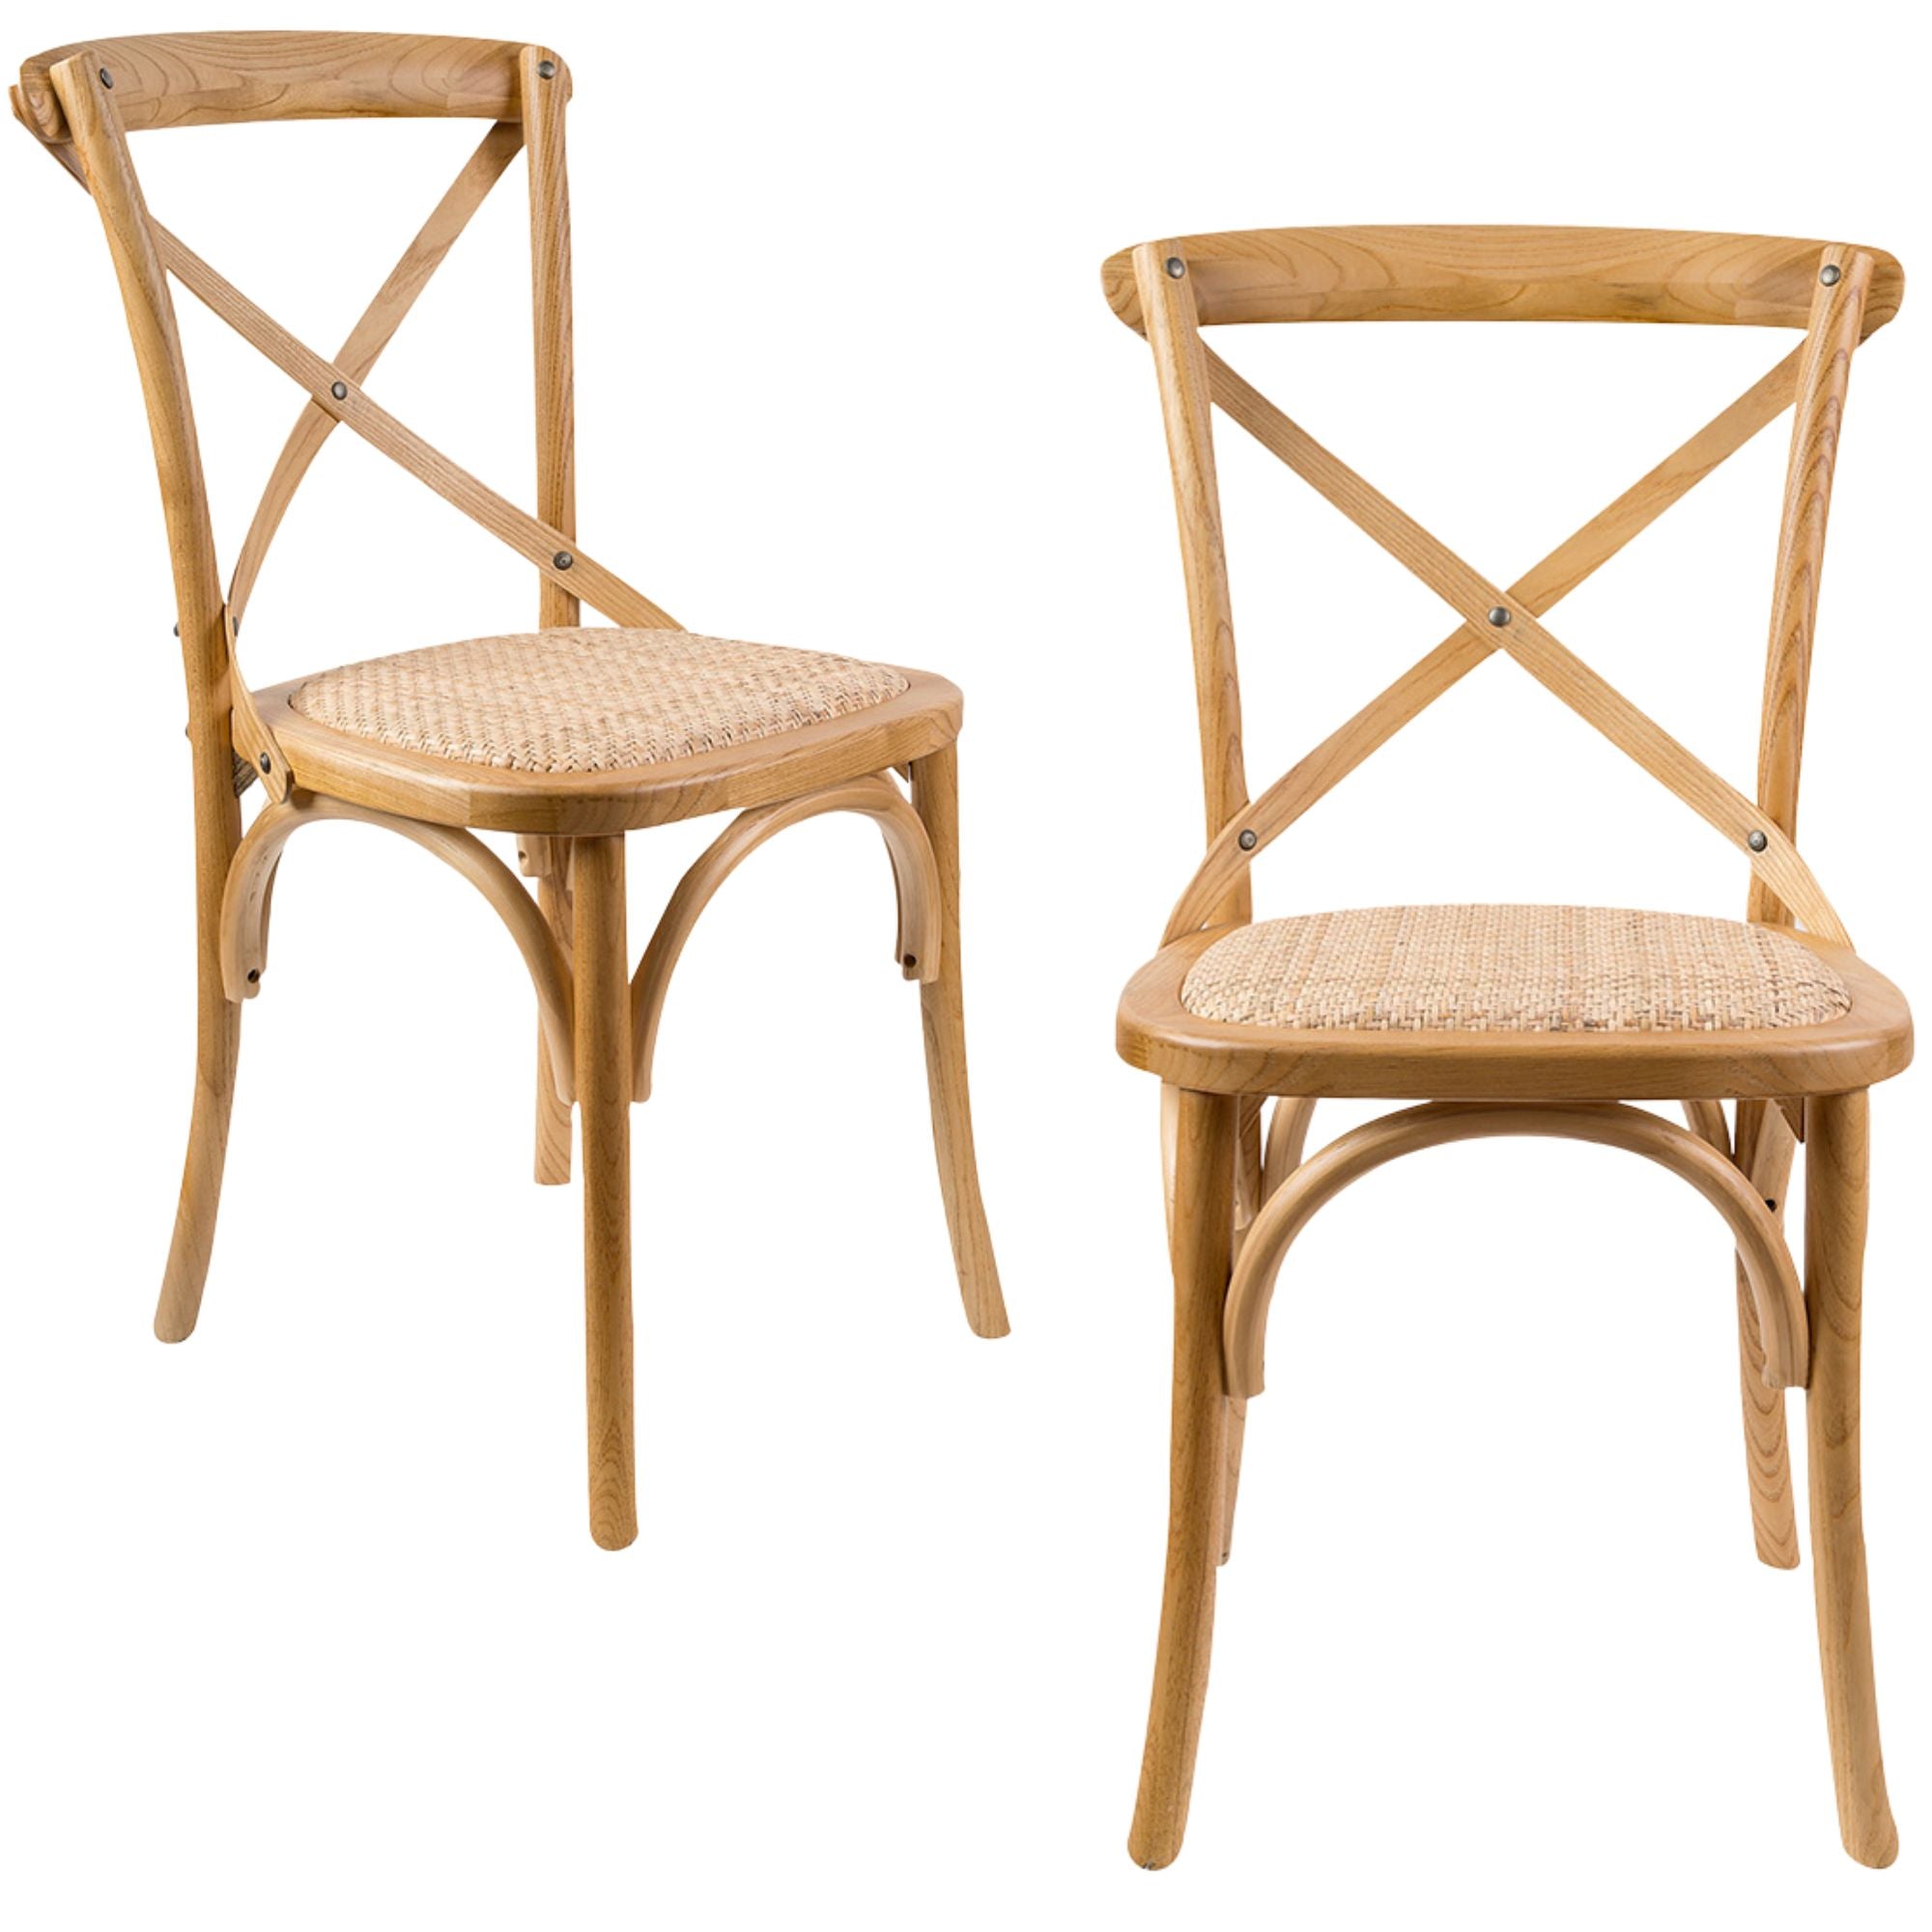 aster-crossback-dining-chair-set-of-2-solid-birch-timber-wood-ratan-seat-oak